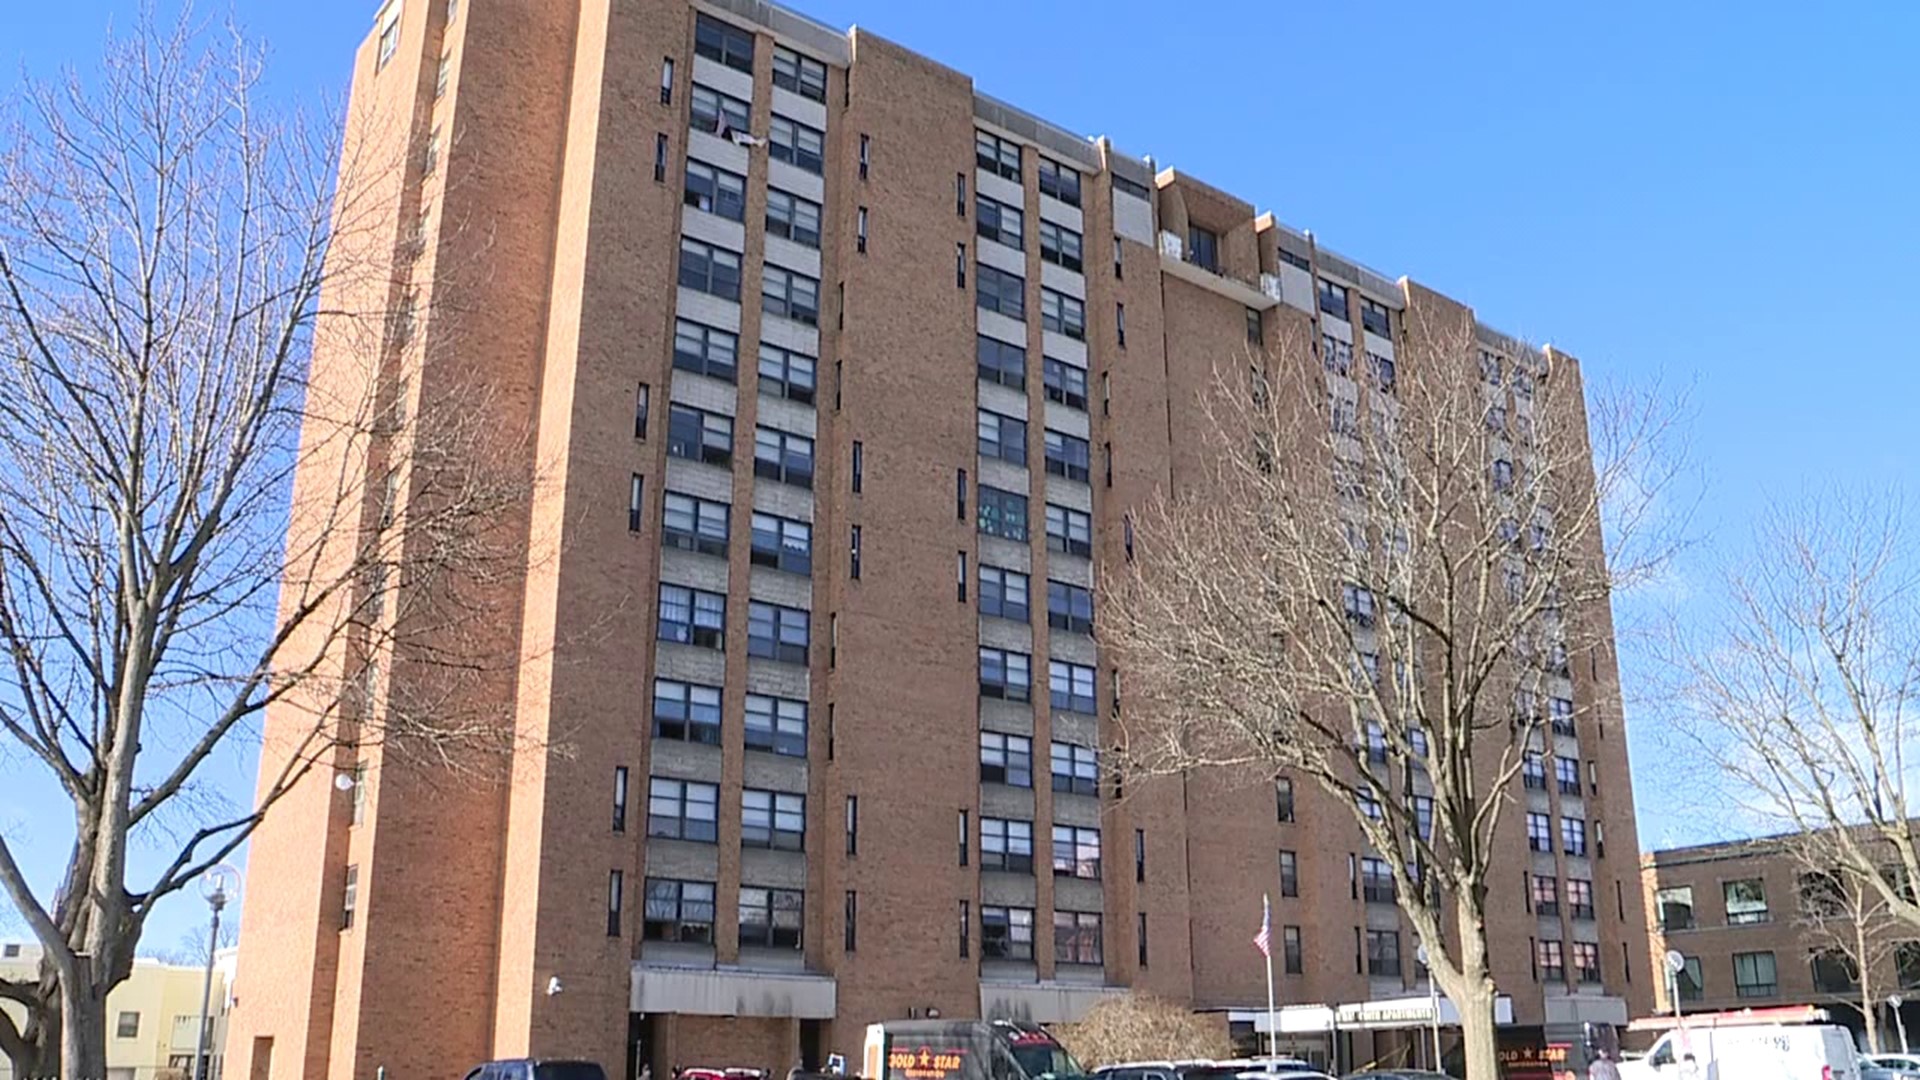 The cause of the fire that sparked last Thursday at B'nai B'rith Senior Apartments along East Northampton Street in Wilkes-Barre has been ruled accidental.